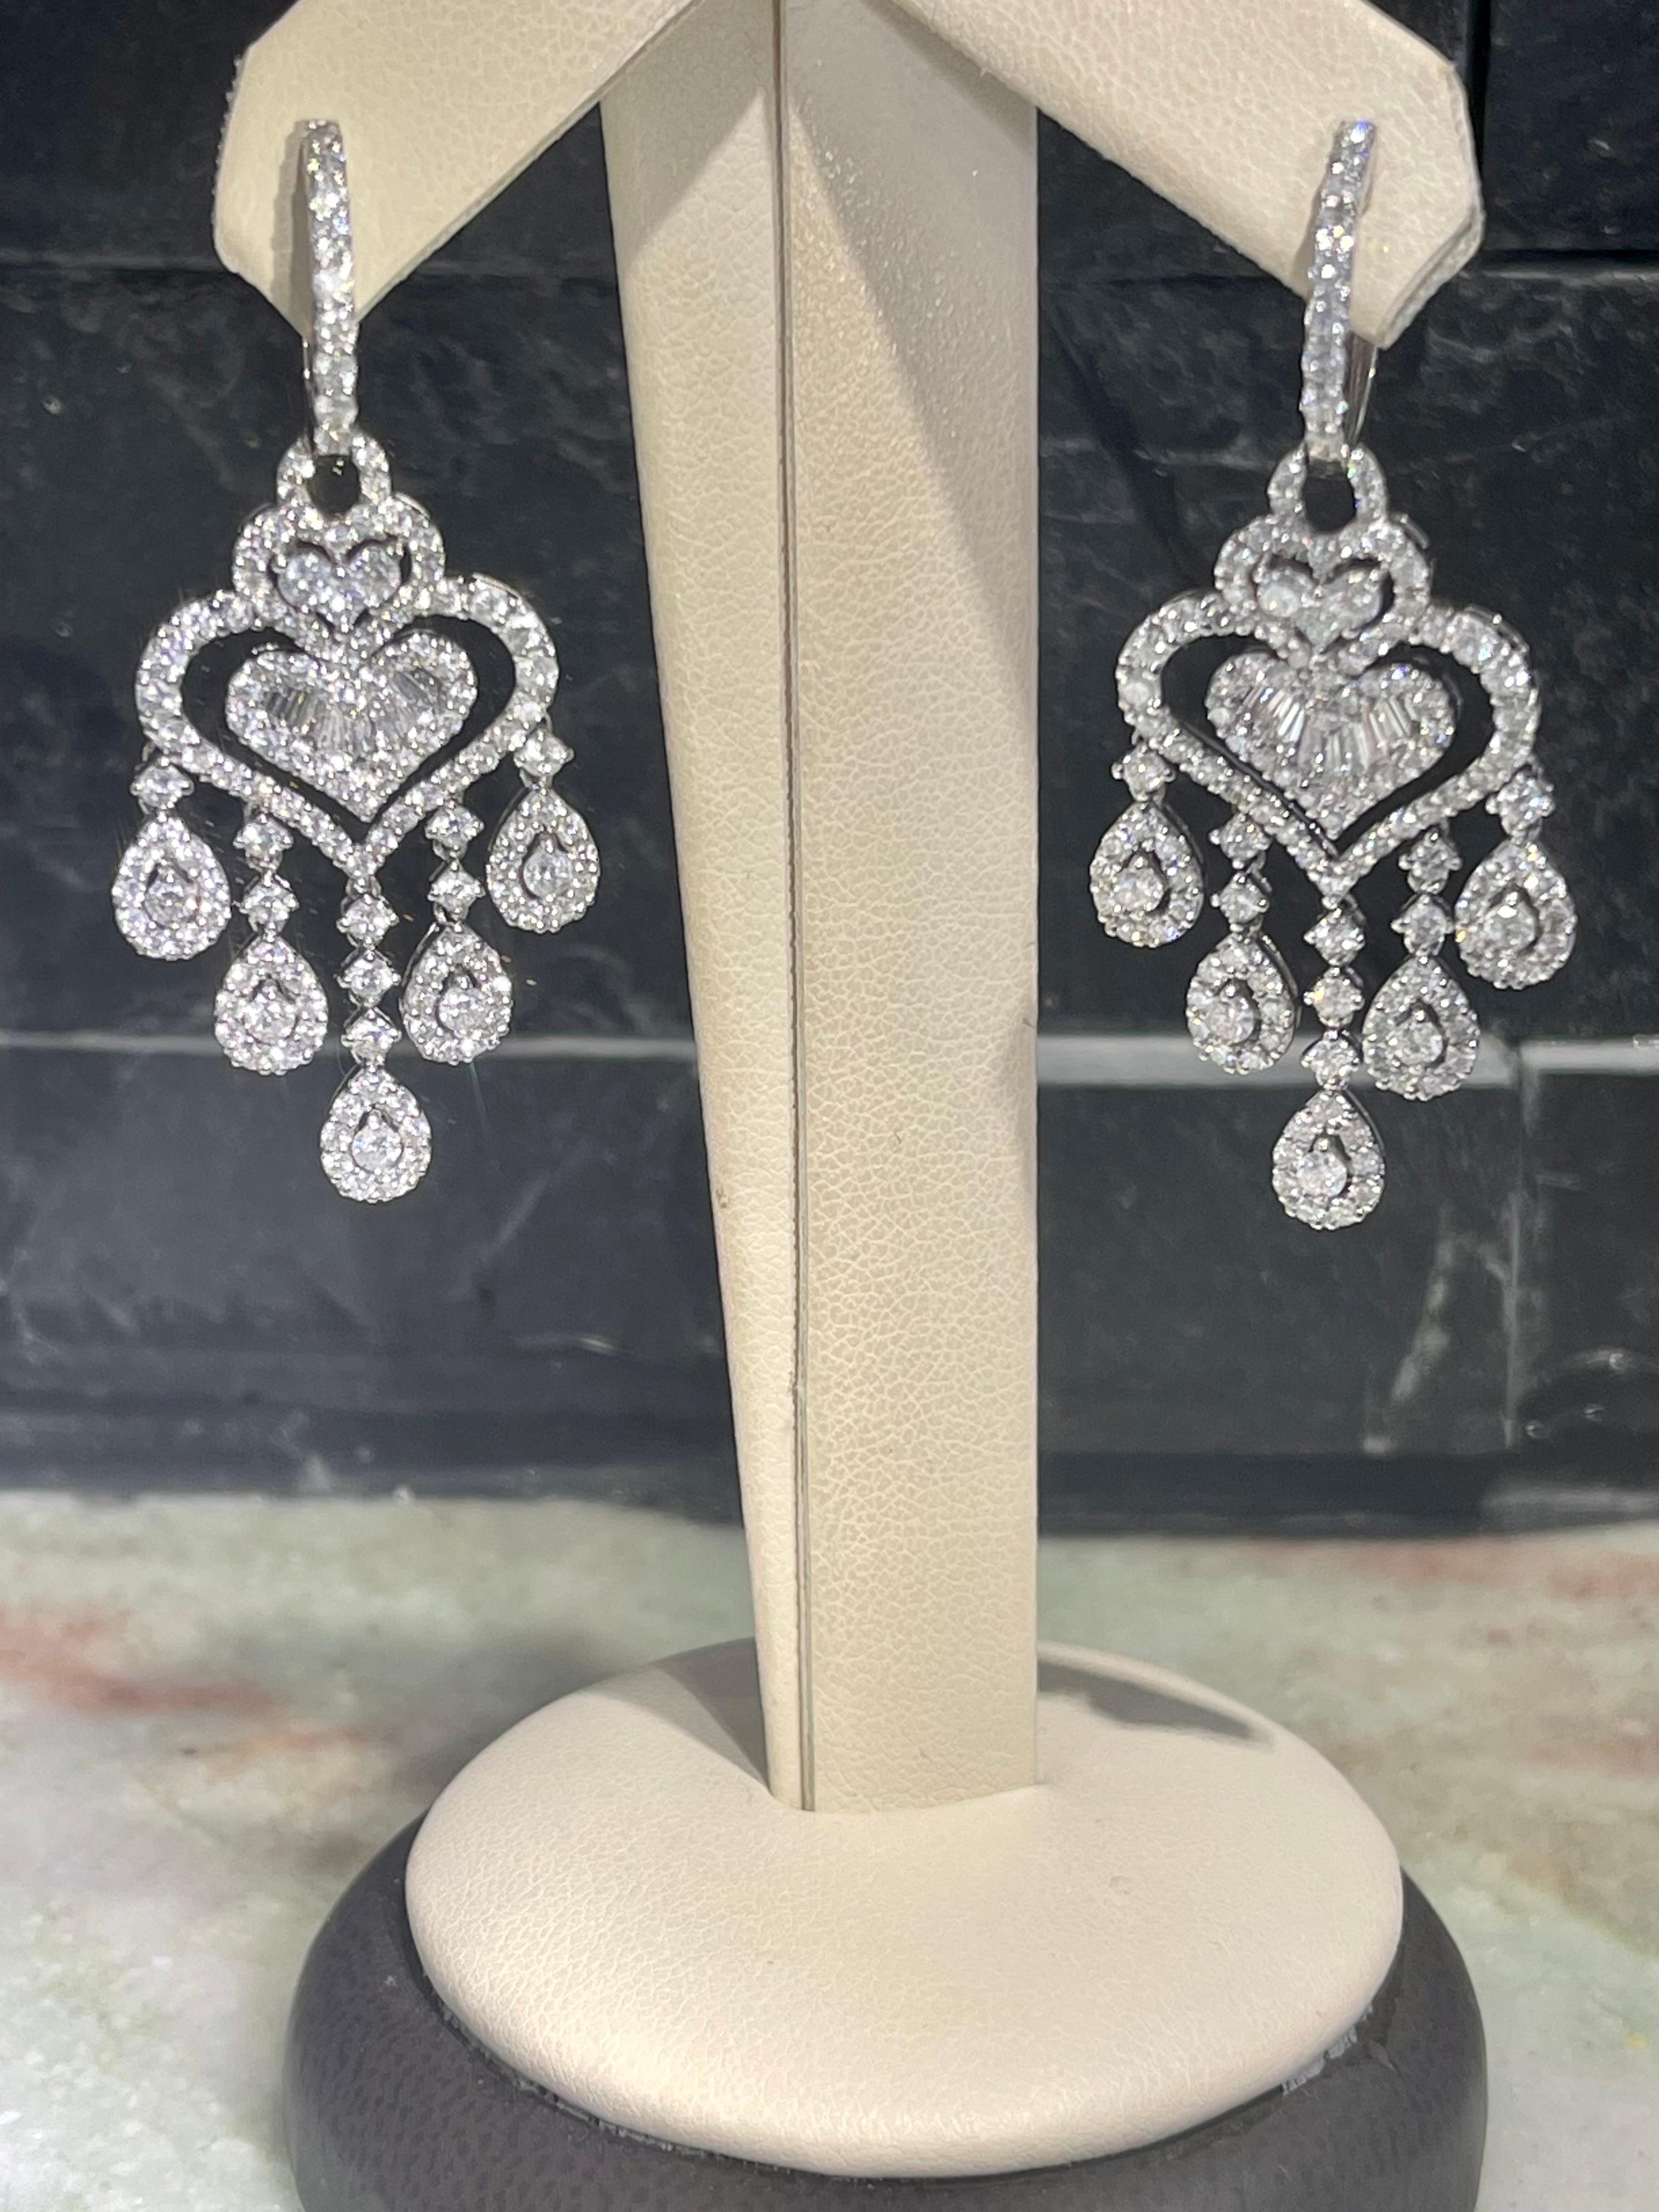 Fabulous Chandelier Diamond Earrings In 18k White Gold  In Excellent Condition For Sale In Fort Lauderdale, FL